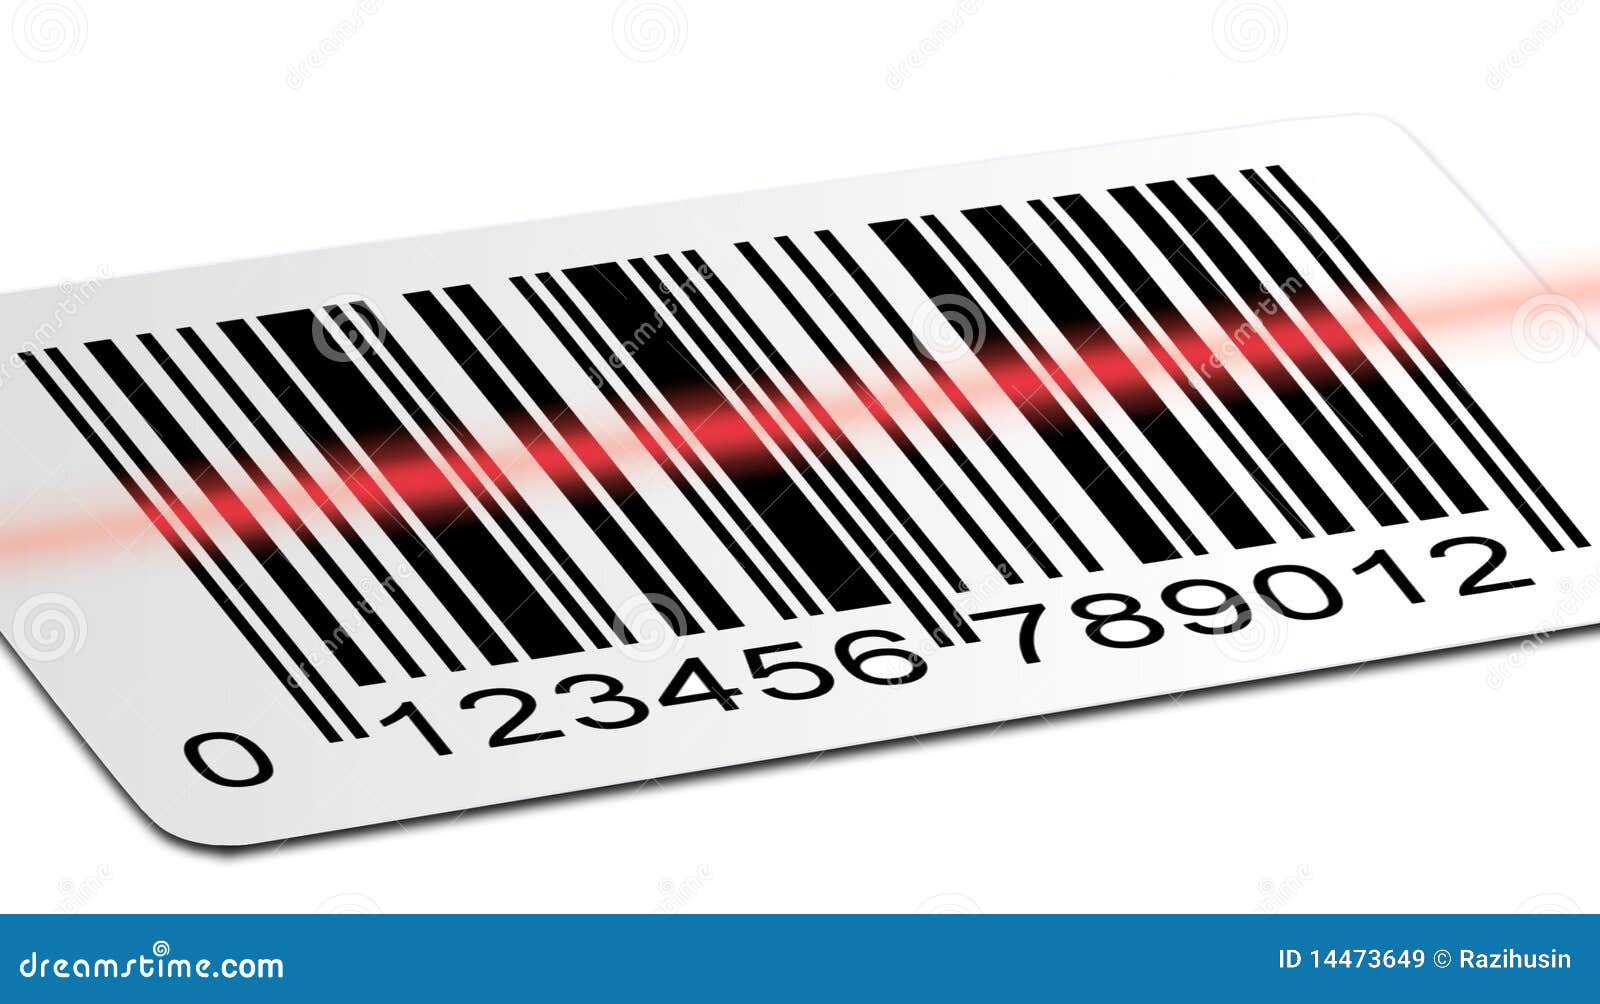 clipart of barcode - photo #46